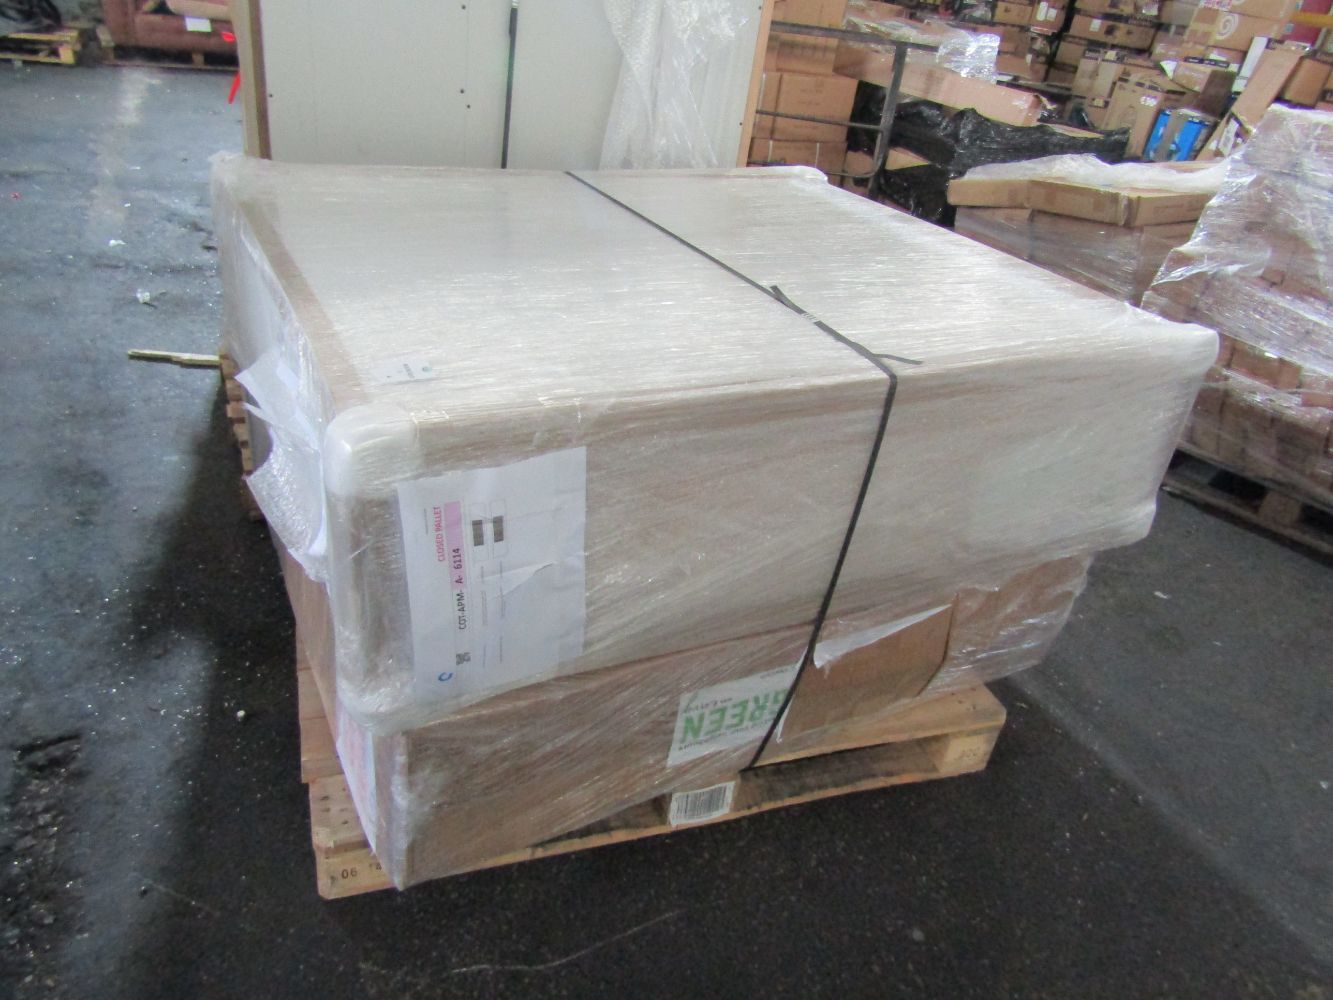 Upcylcers pallets of B.E.R pallets of customer returns furntiure and sofas from SCS, Heals, Swoon, John Lewis, Oak furniture land and more